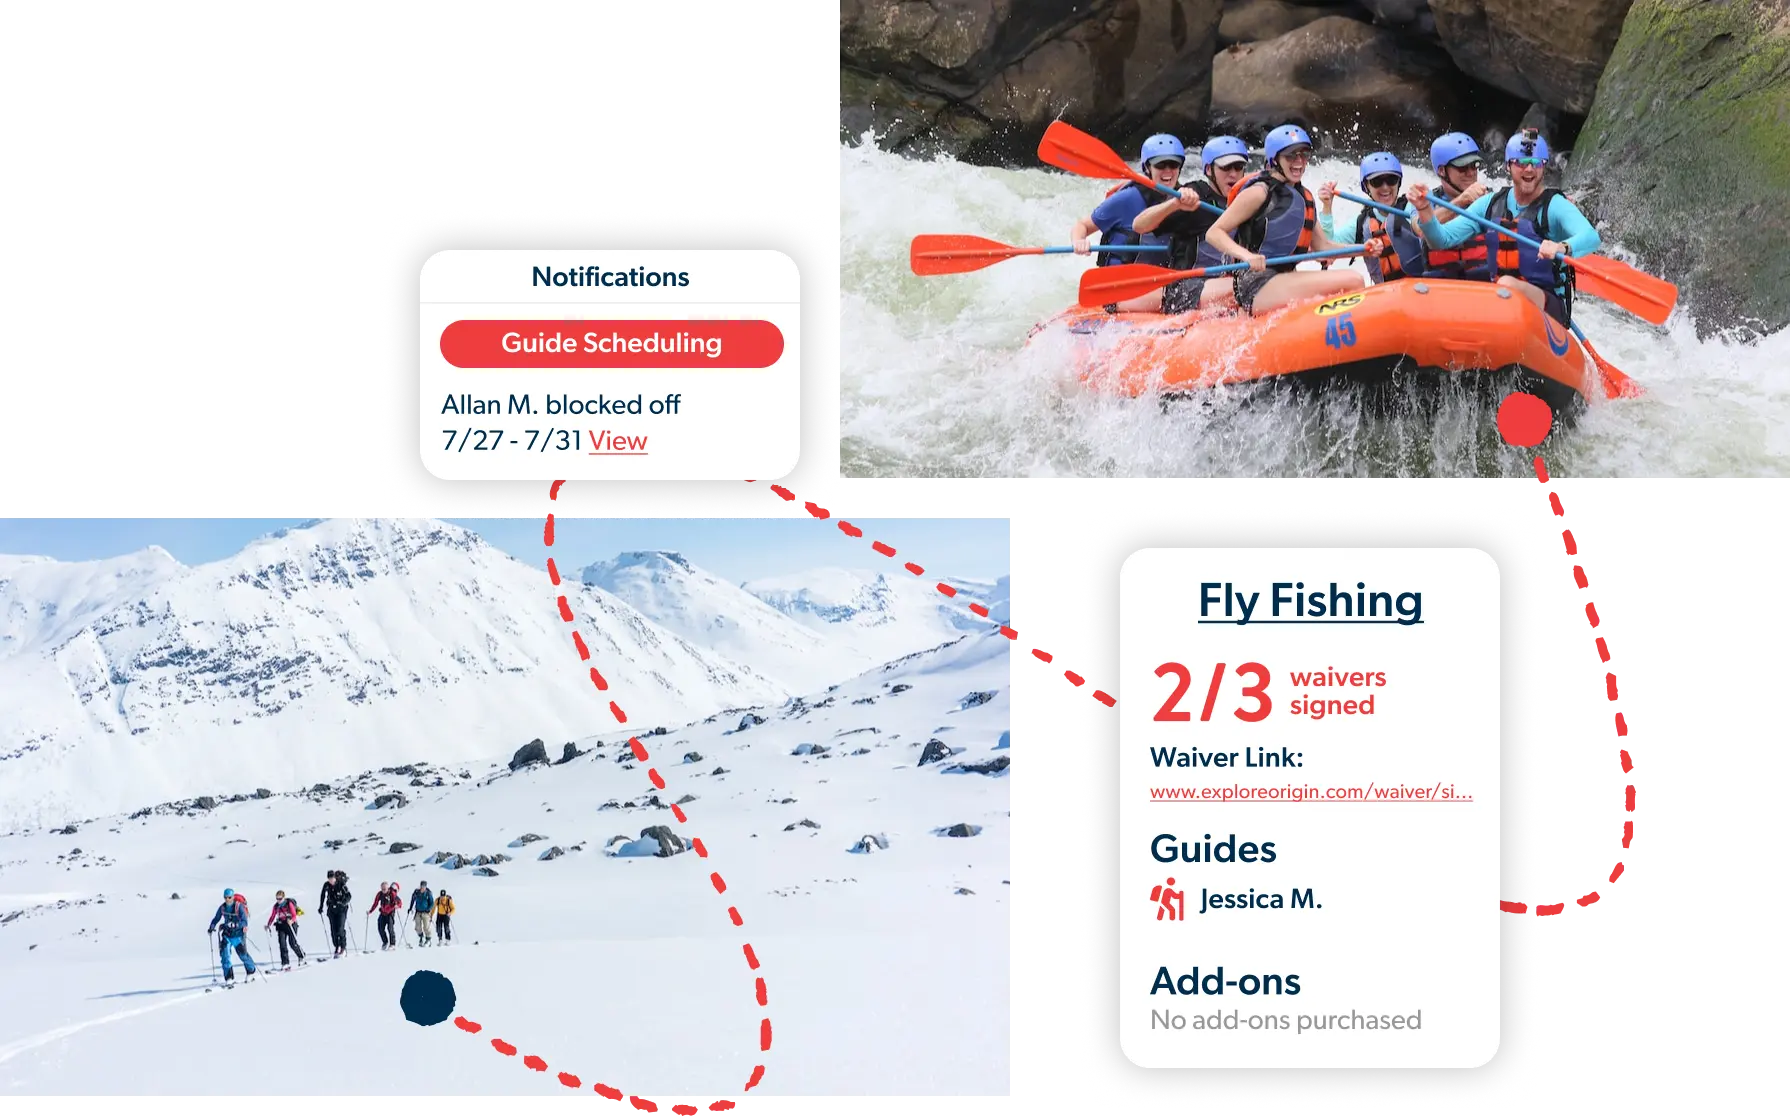 A photo of river rafters and a photo of backcountry skiers overlaid with screenshots from the Origin app